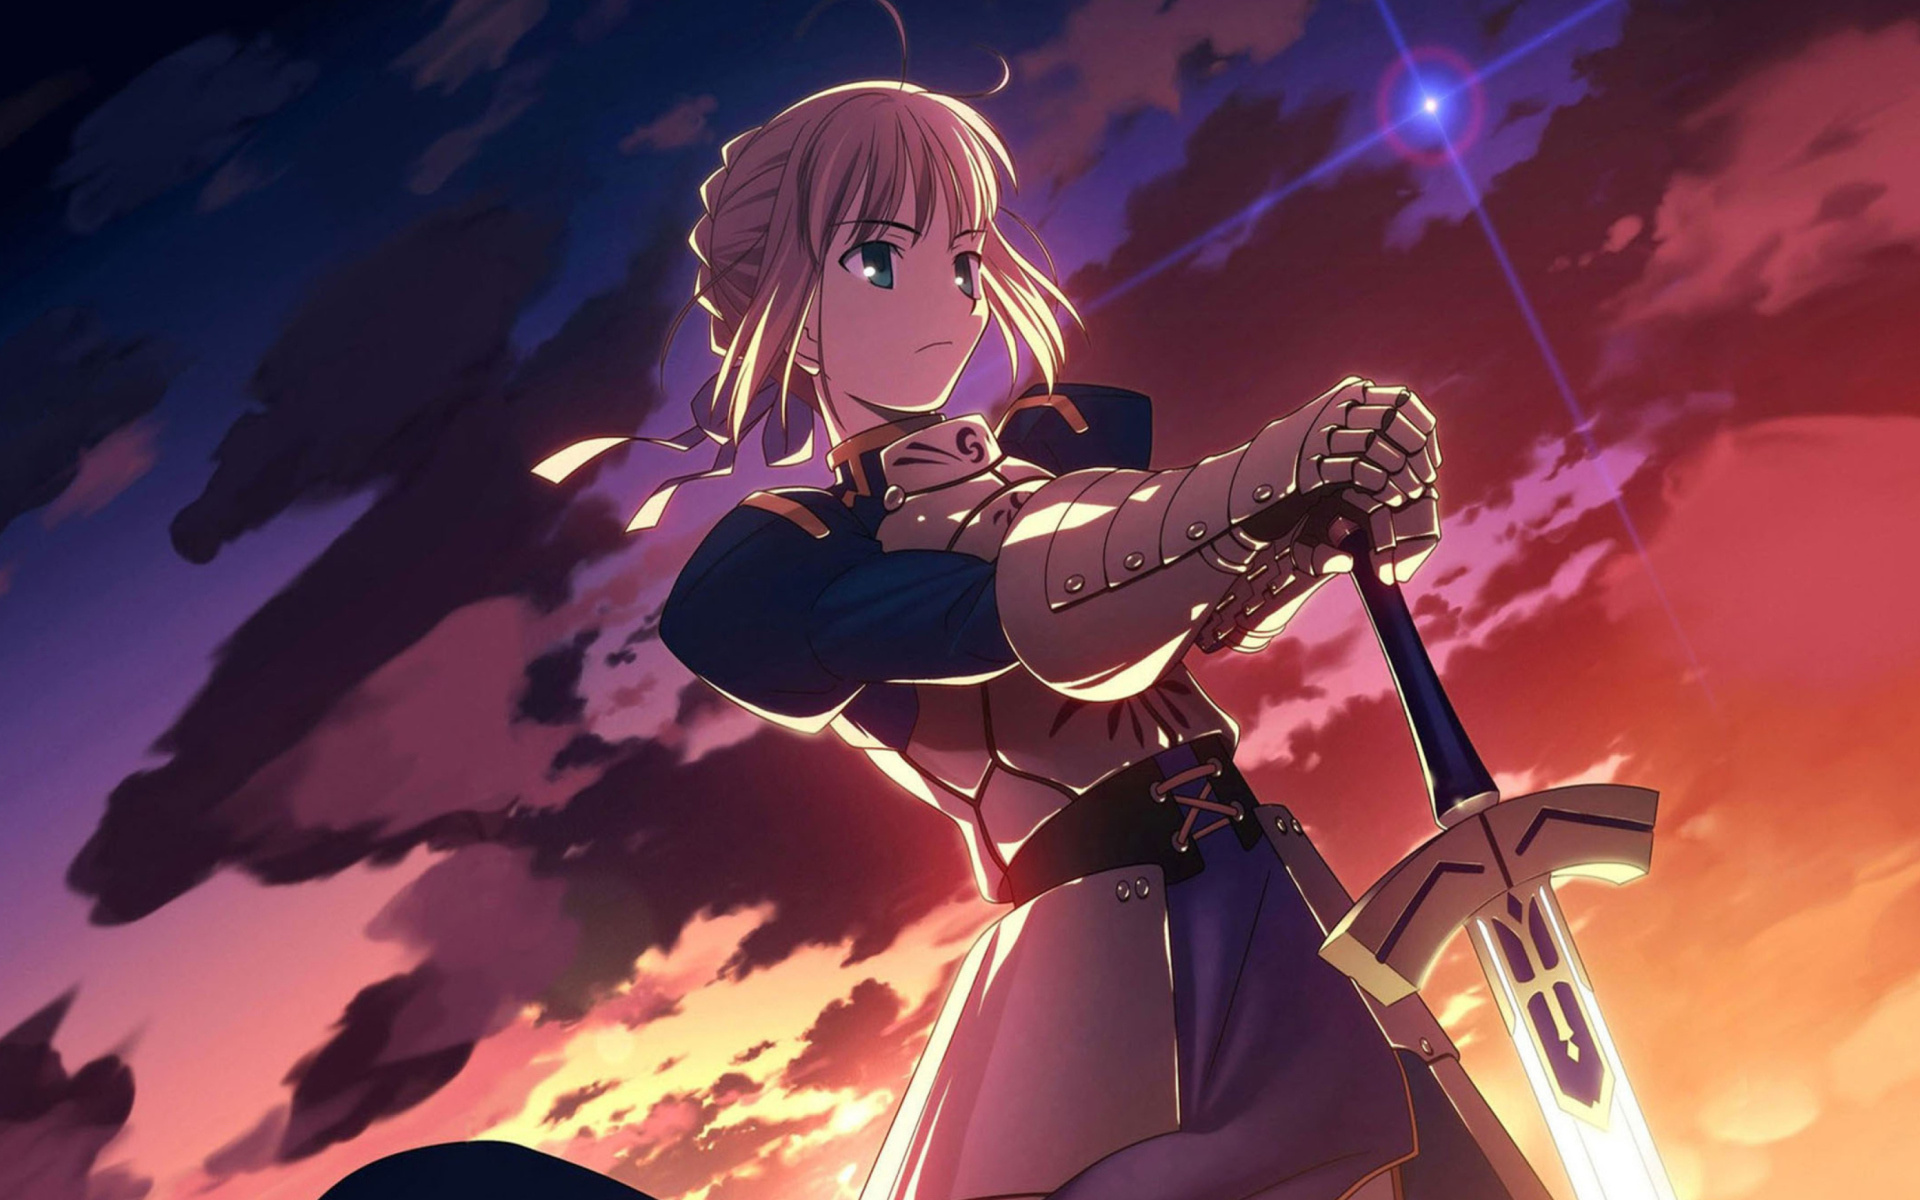 Fate/stay night: Unlimited Blade Works, Saber wallpapers, Top free backgrounds, 1920x1200 HD Desktop